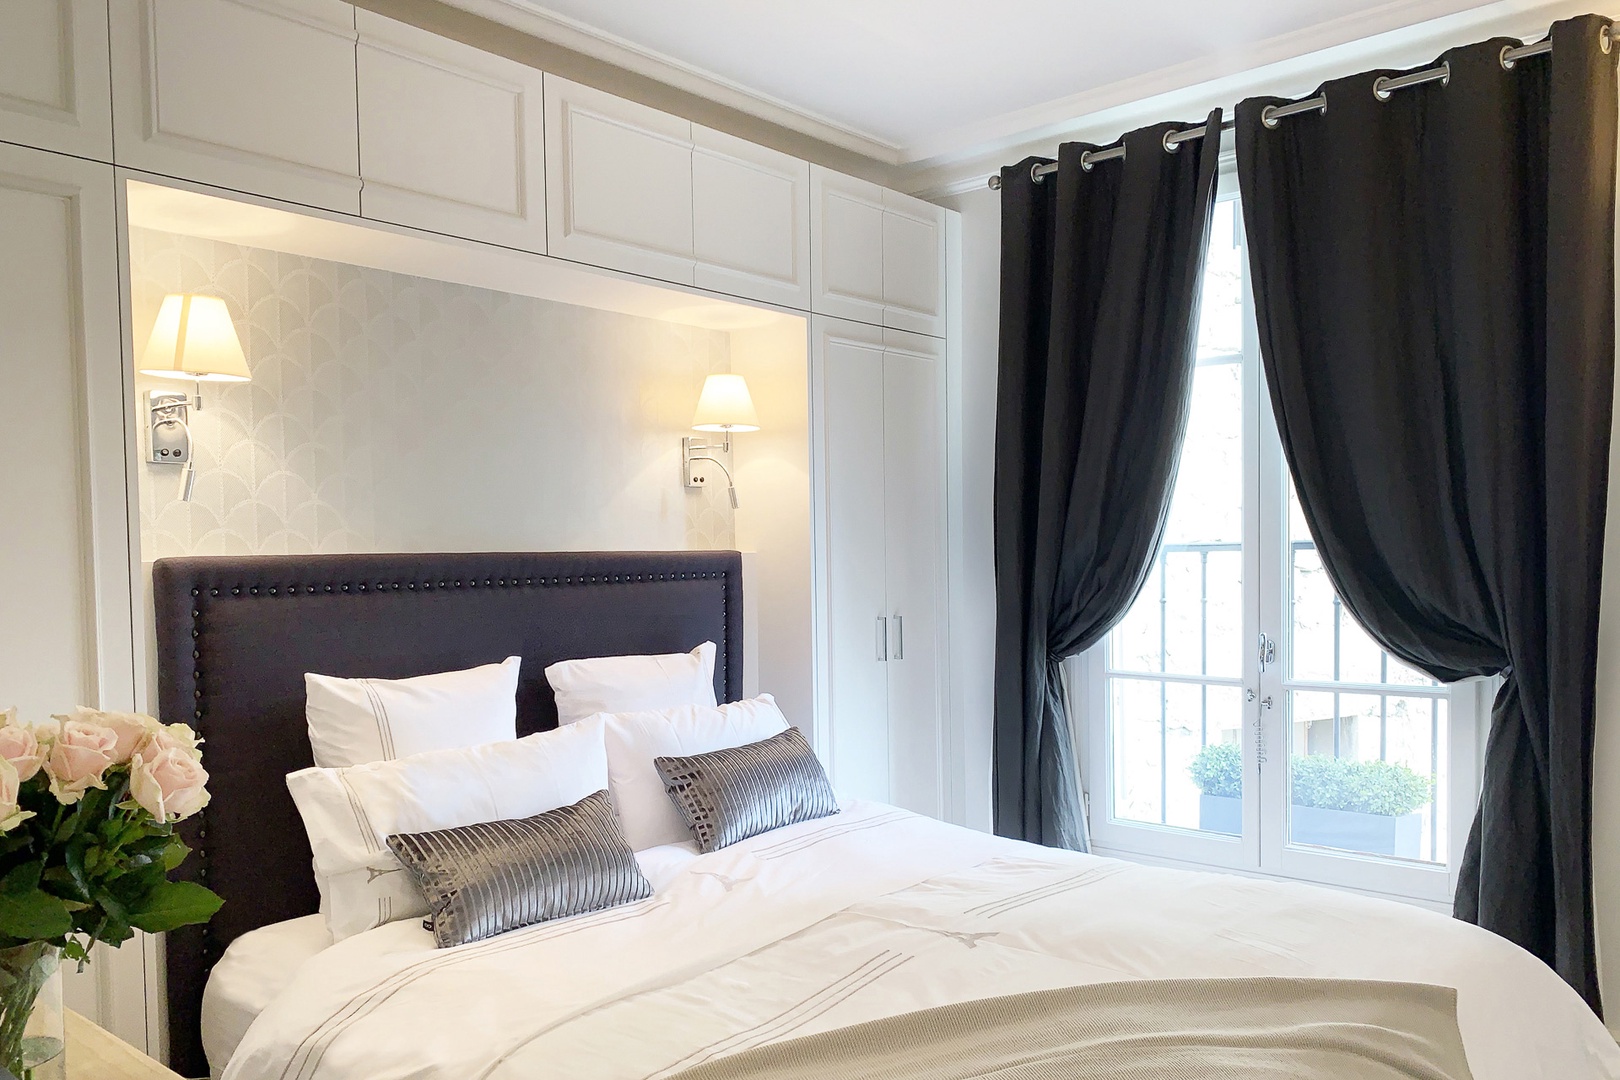 All the bedrooms are inviting and decorated with a French flair.